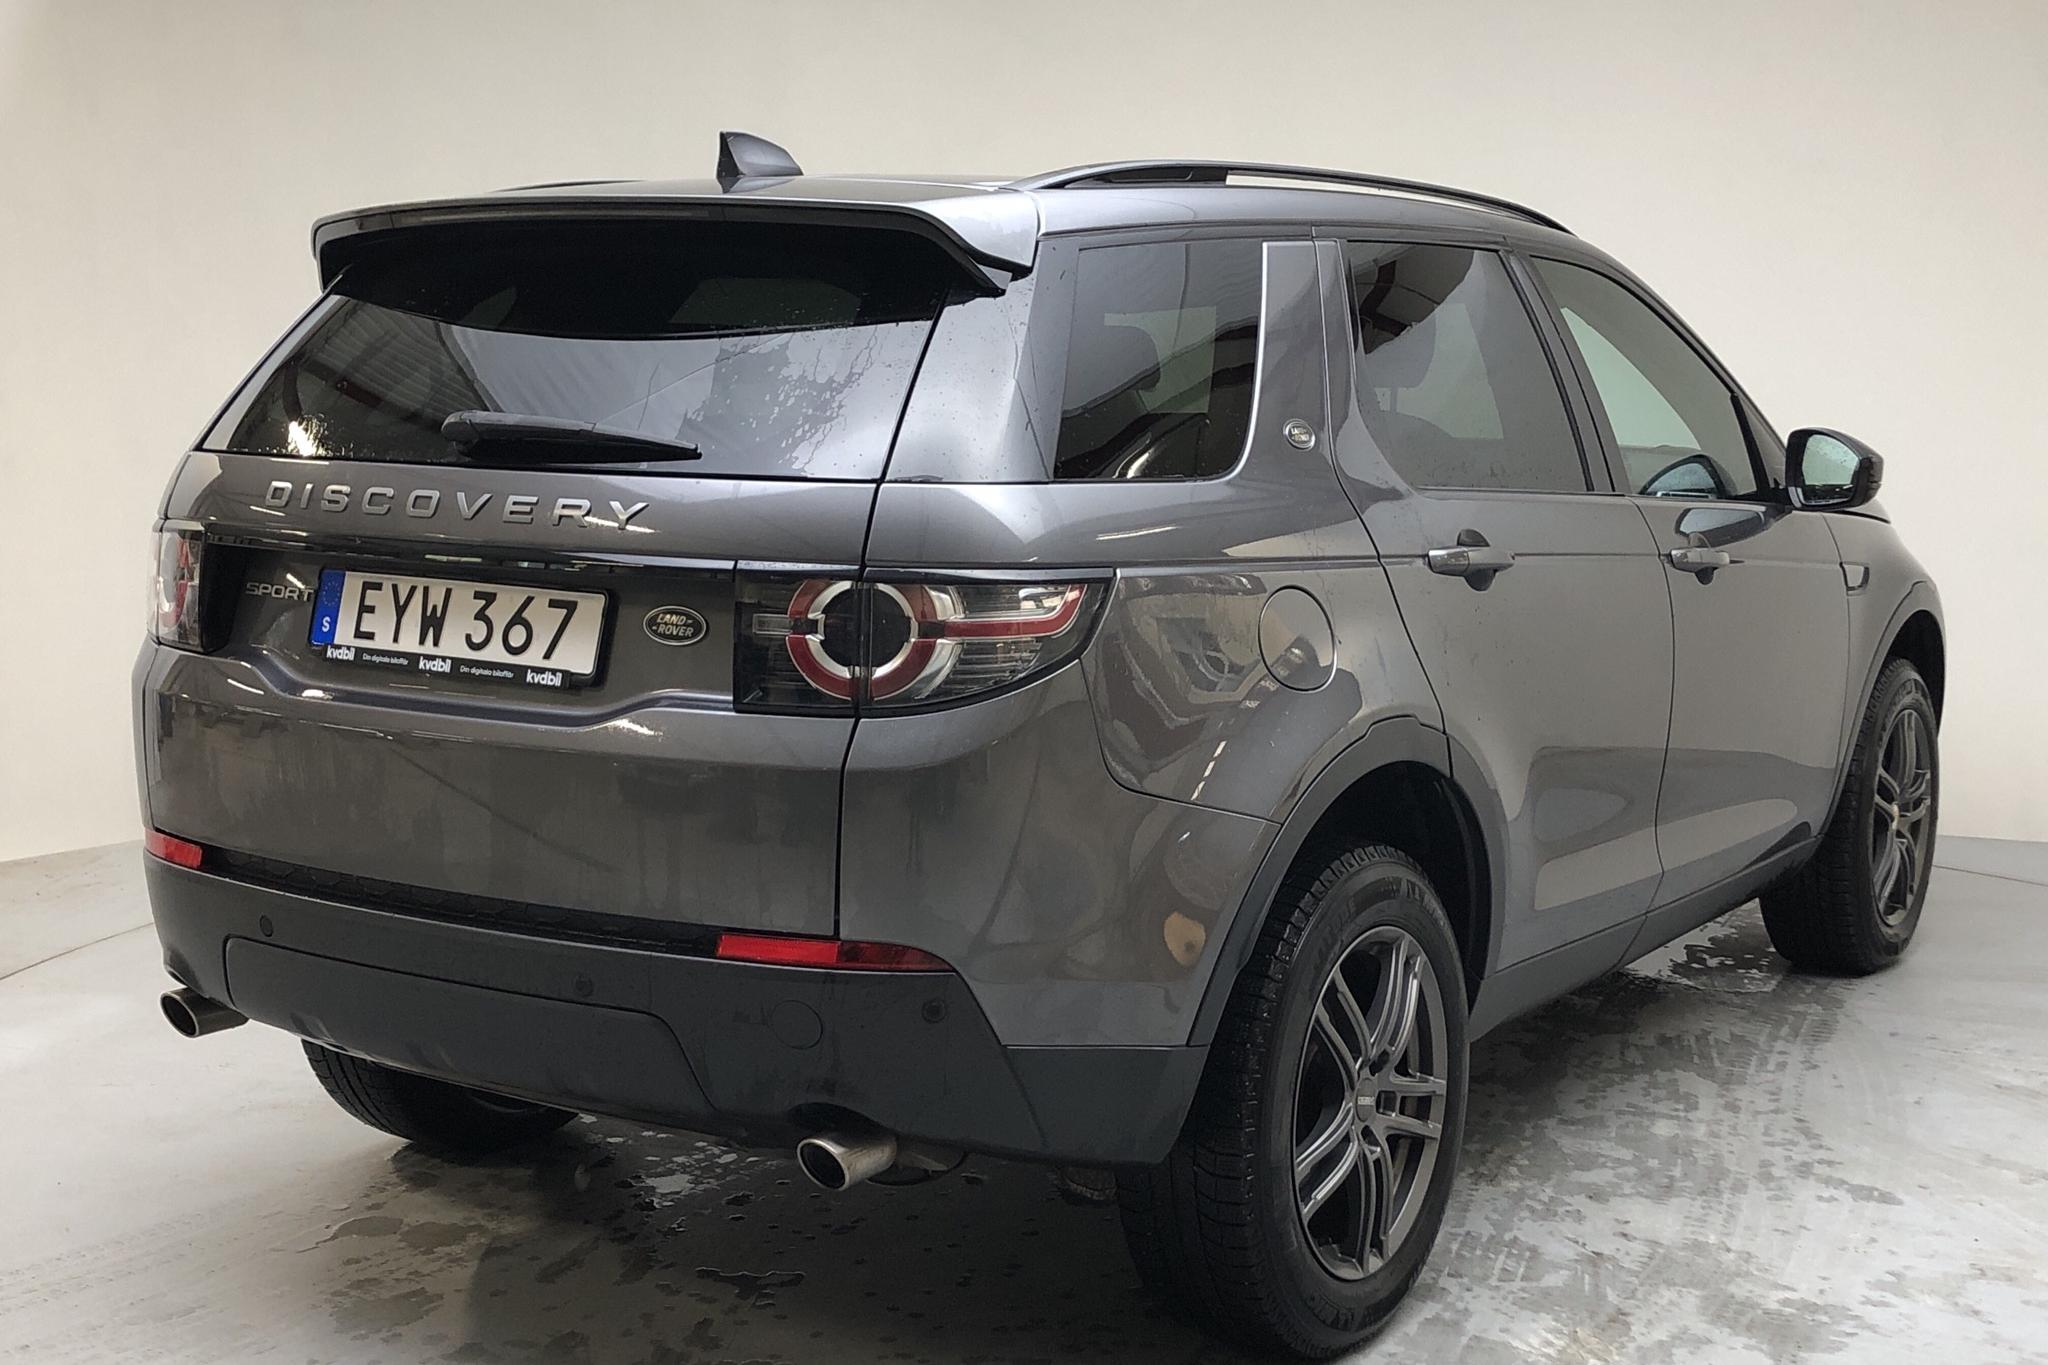 Land Rover Discovery Sport 2.0 TD4 AWD (180hk) - 101 650 km - Automatic - gray - 2017